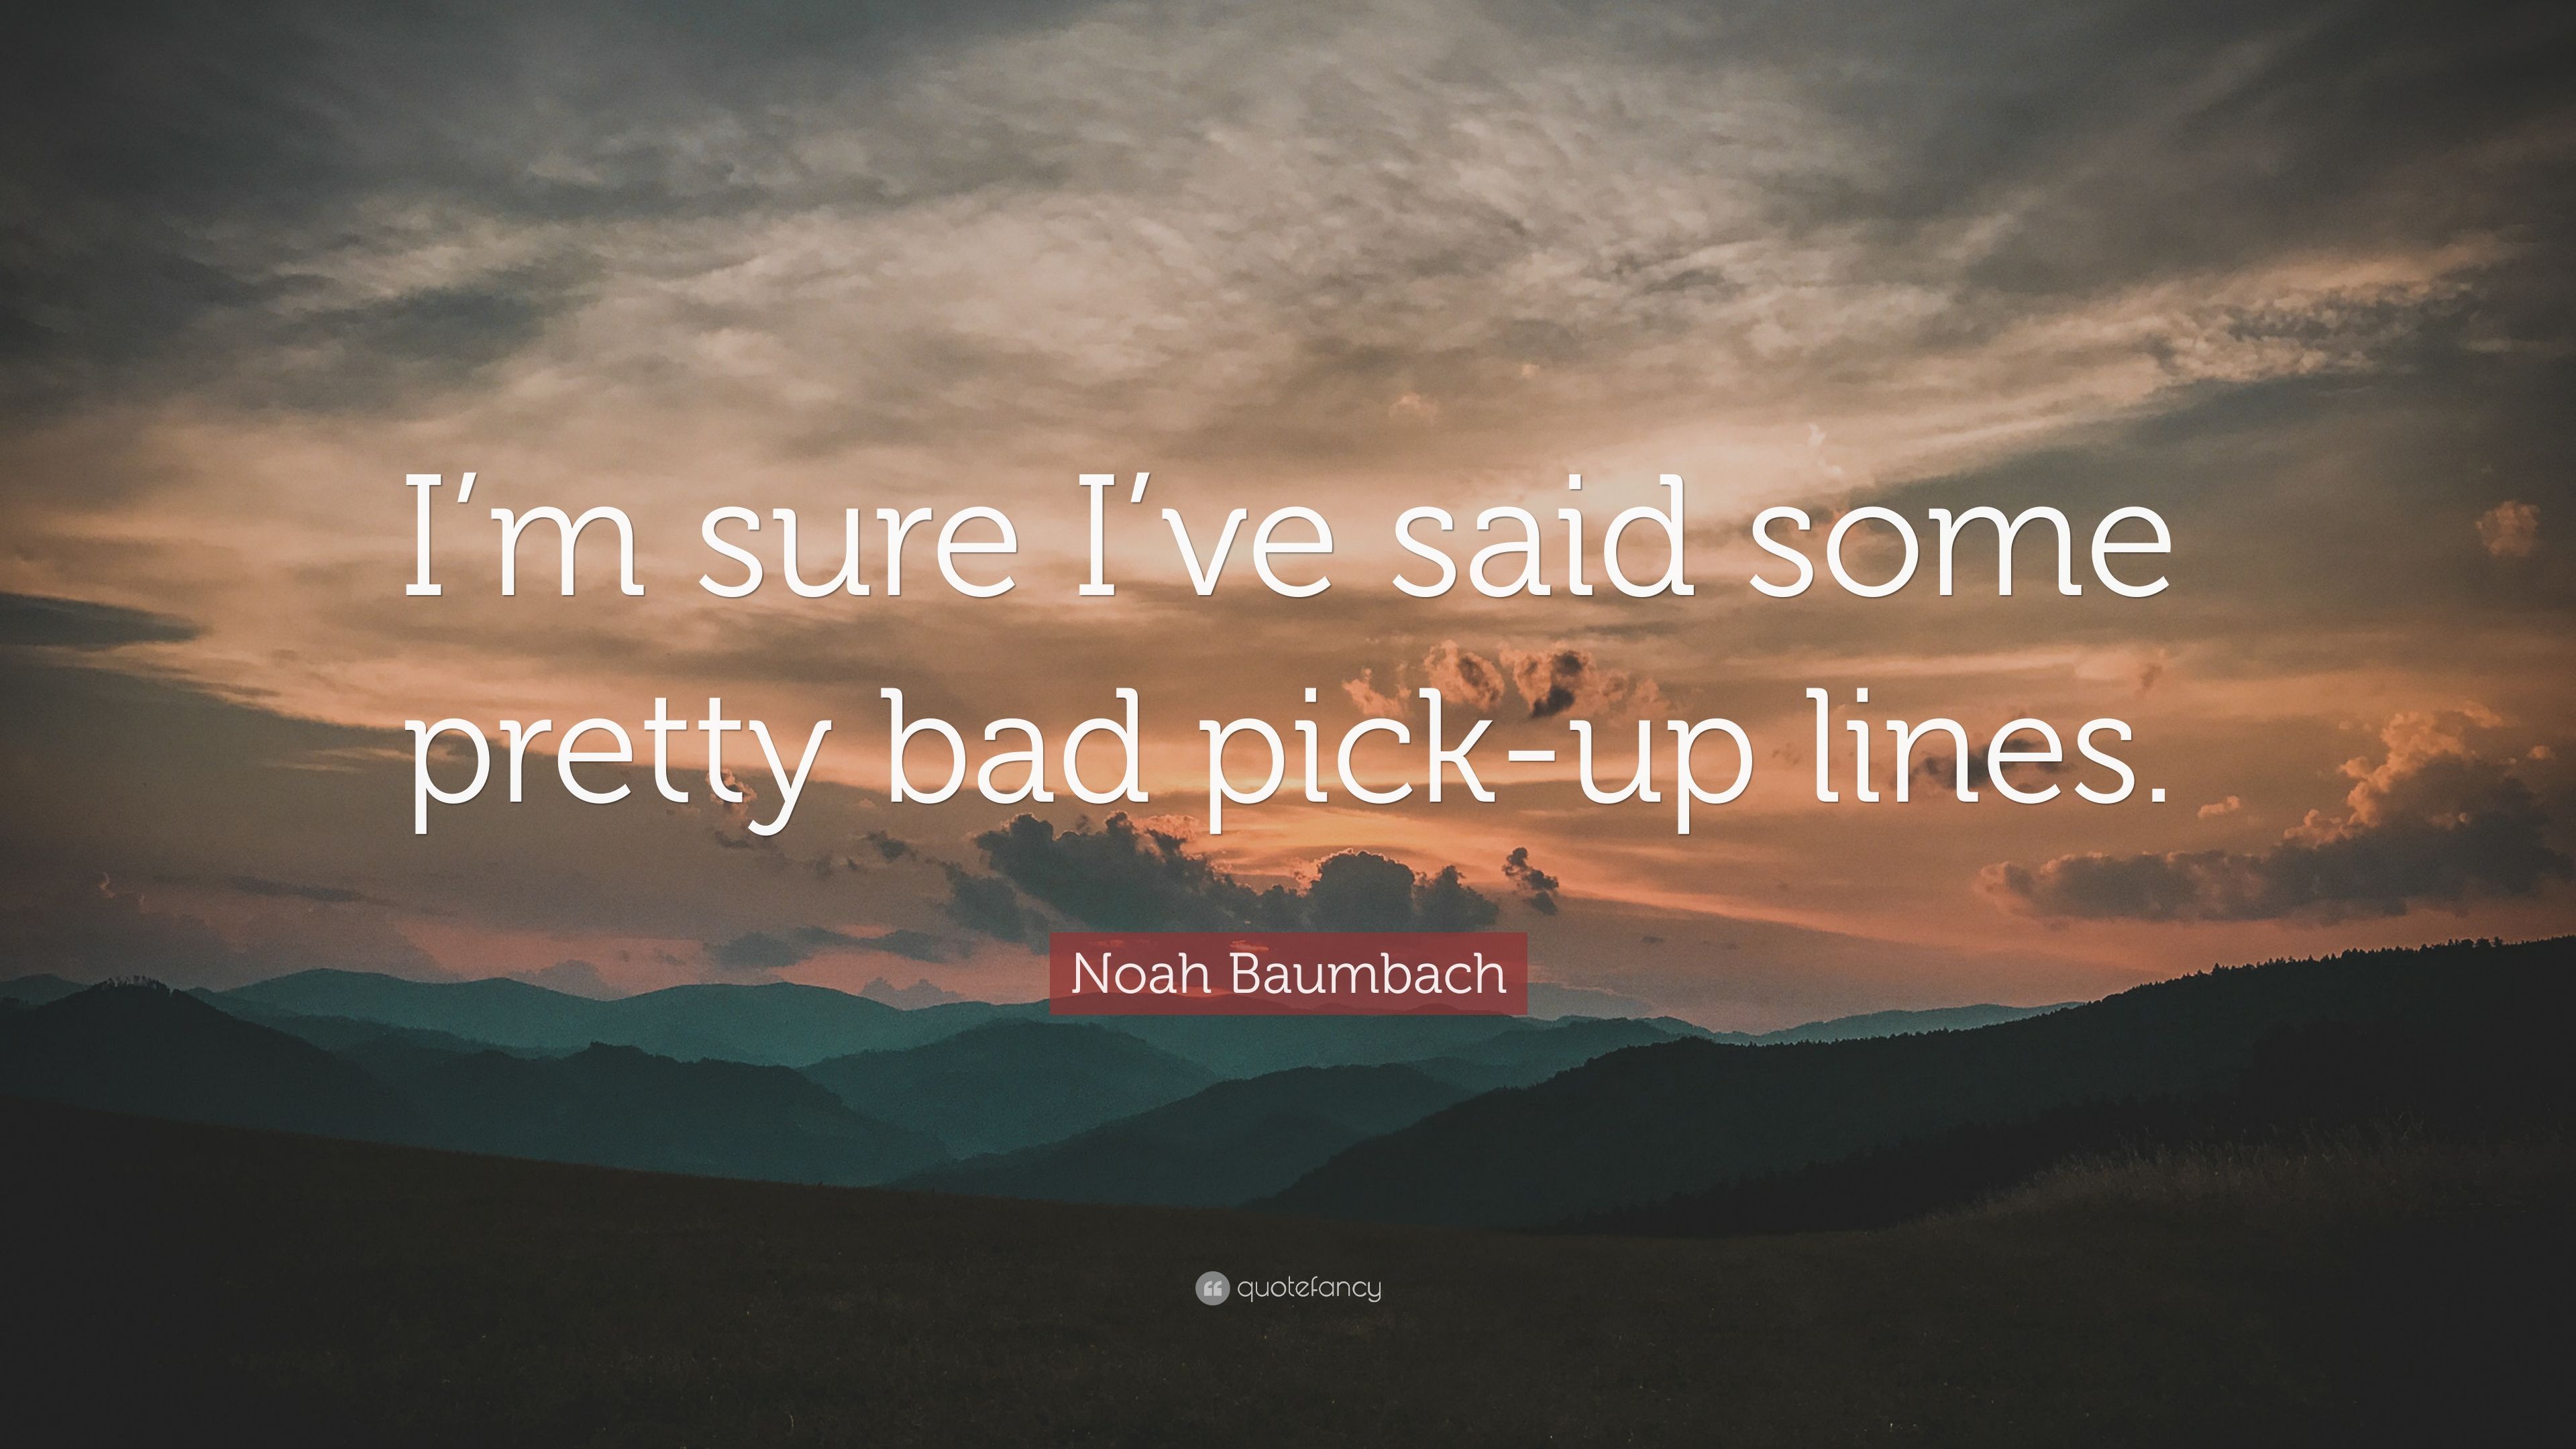 Noah Baumbach Quote: “I'm Sure I've Said Some Pretty Bad Pick Up Lines.” (7 Wallpaper)